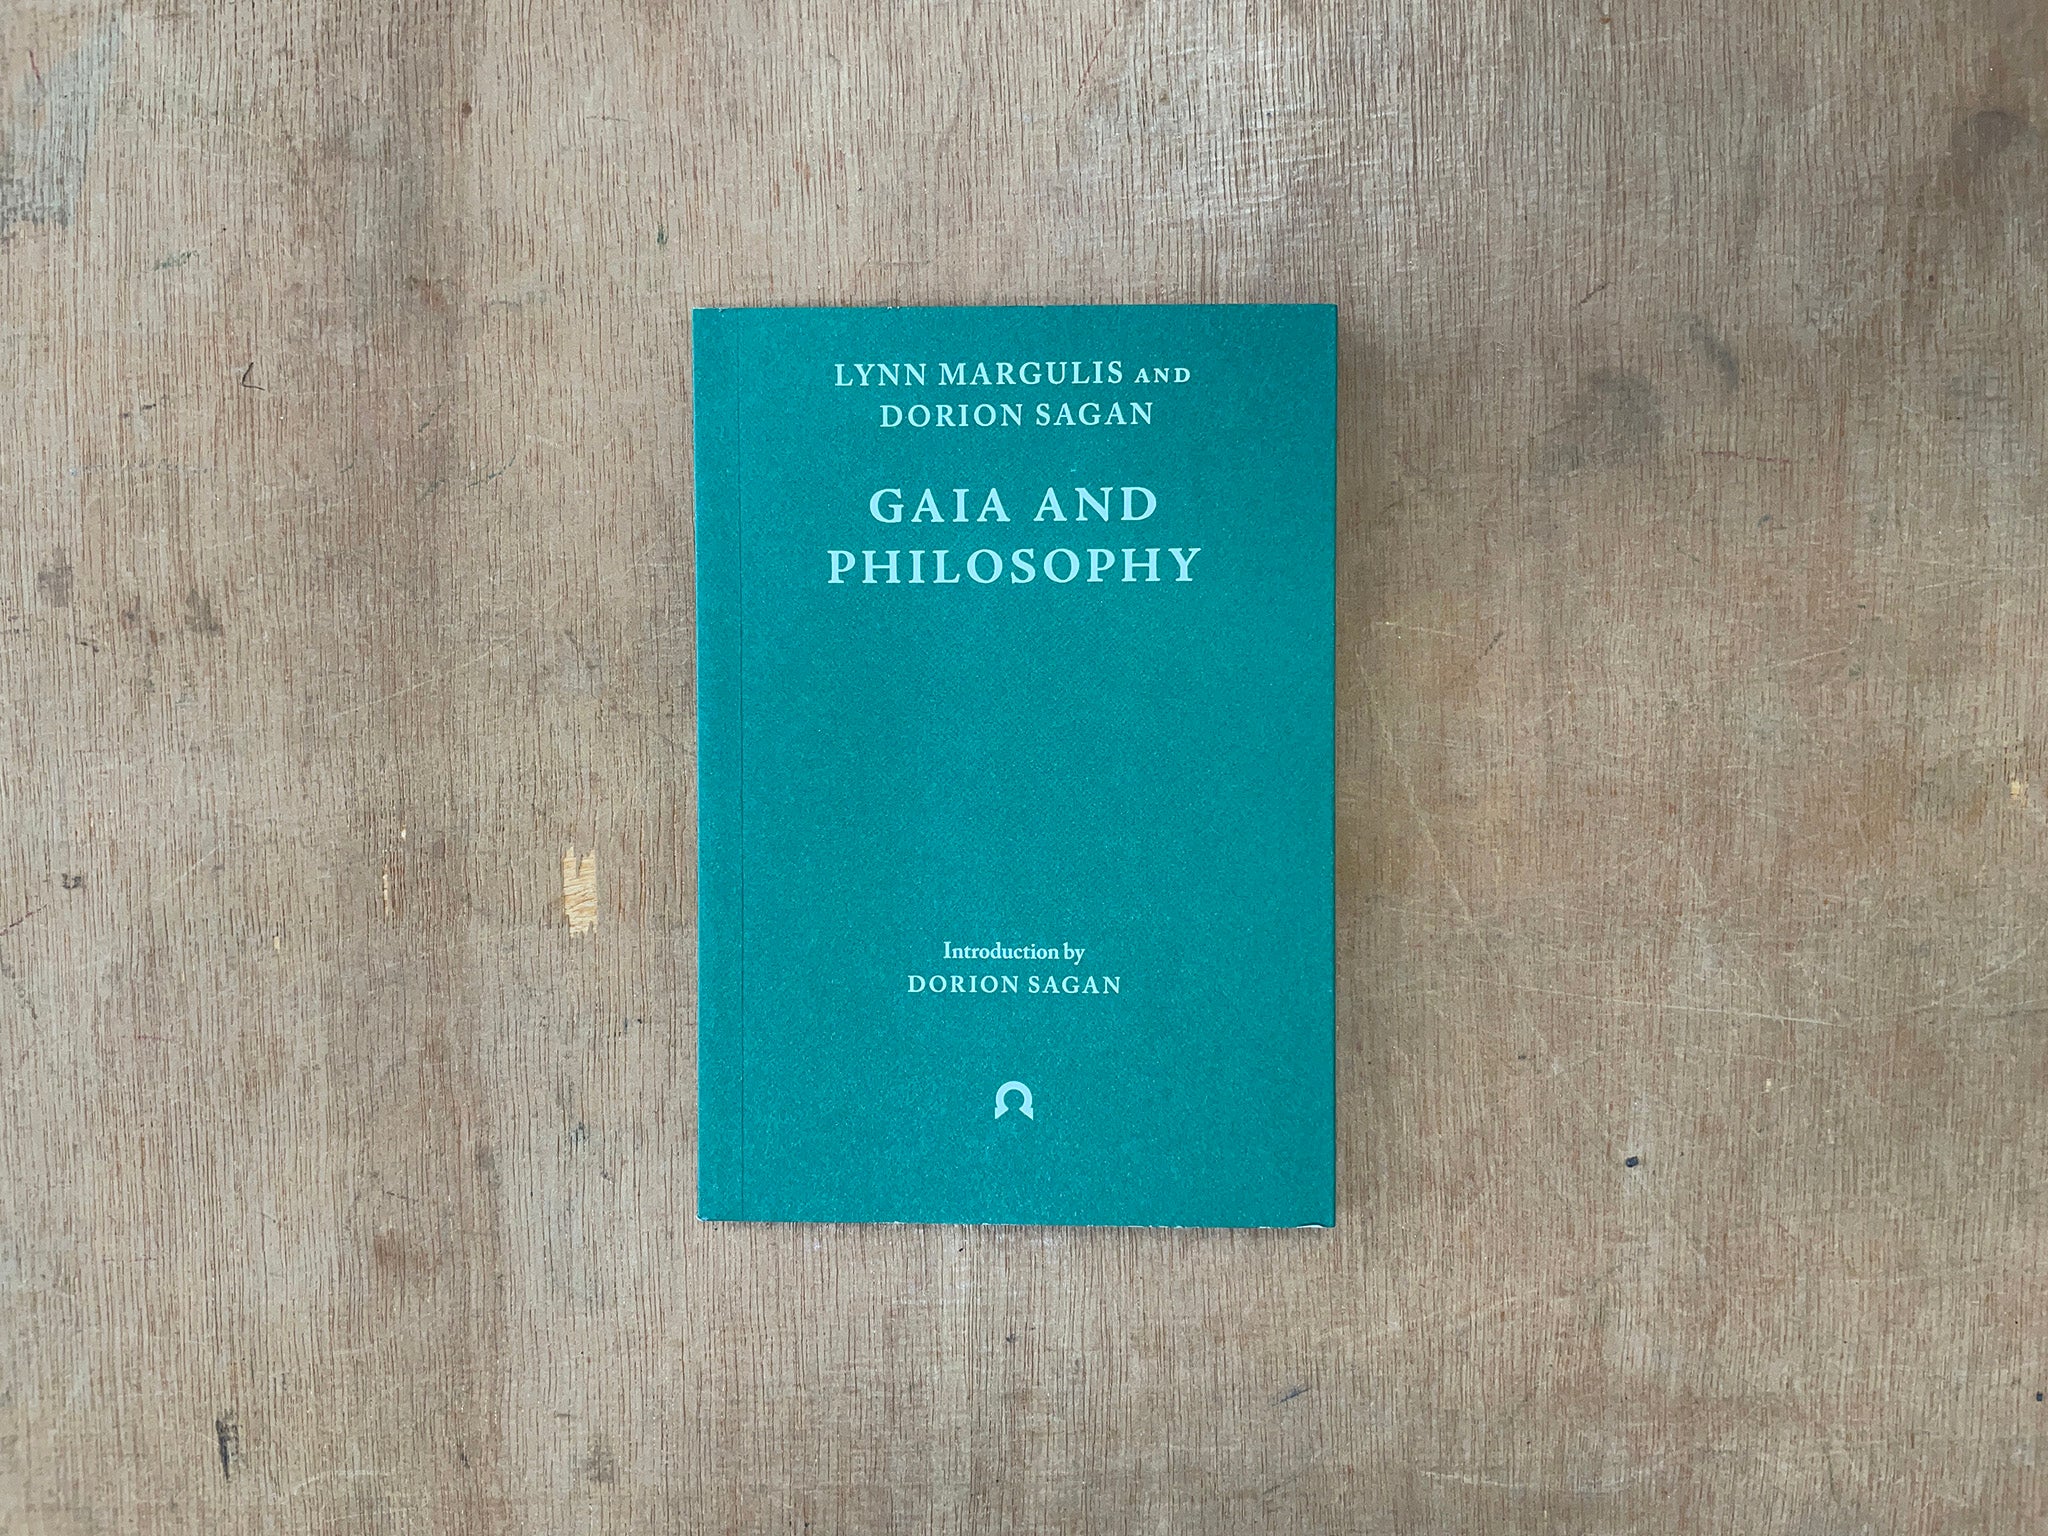 GAIA AND PHILOSOPHY By Dorion Sagan And Lynn Margulis